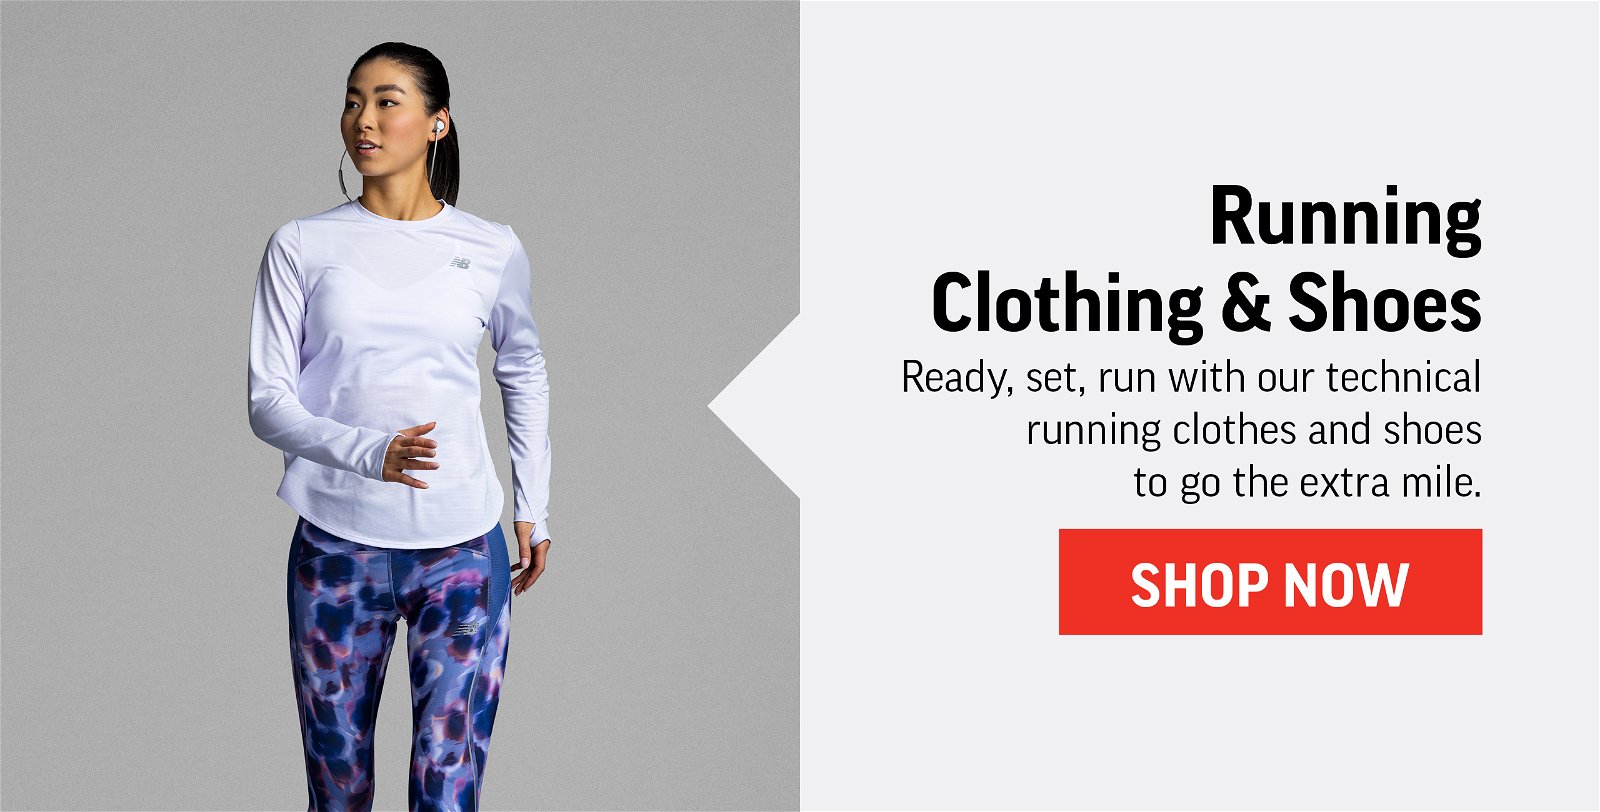 RUNNING CLOTHING & SHOES